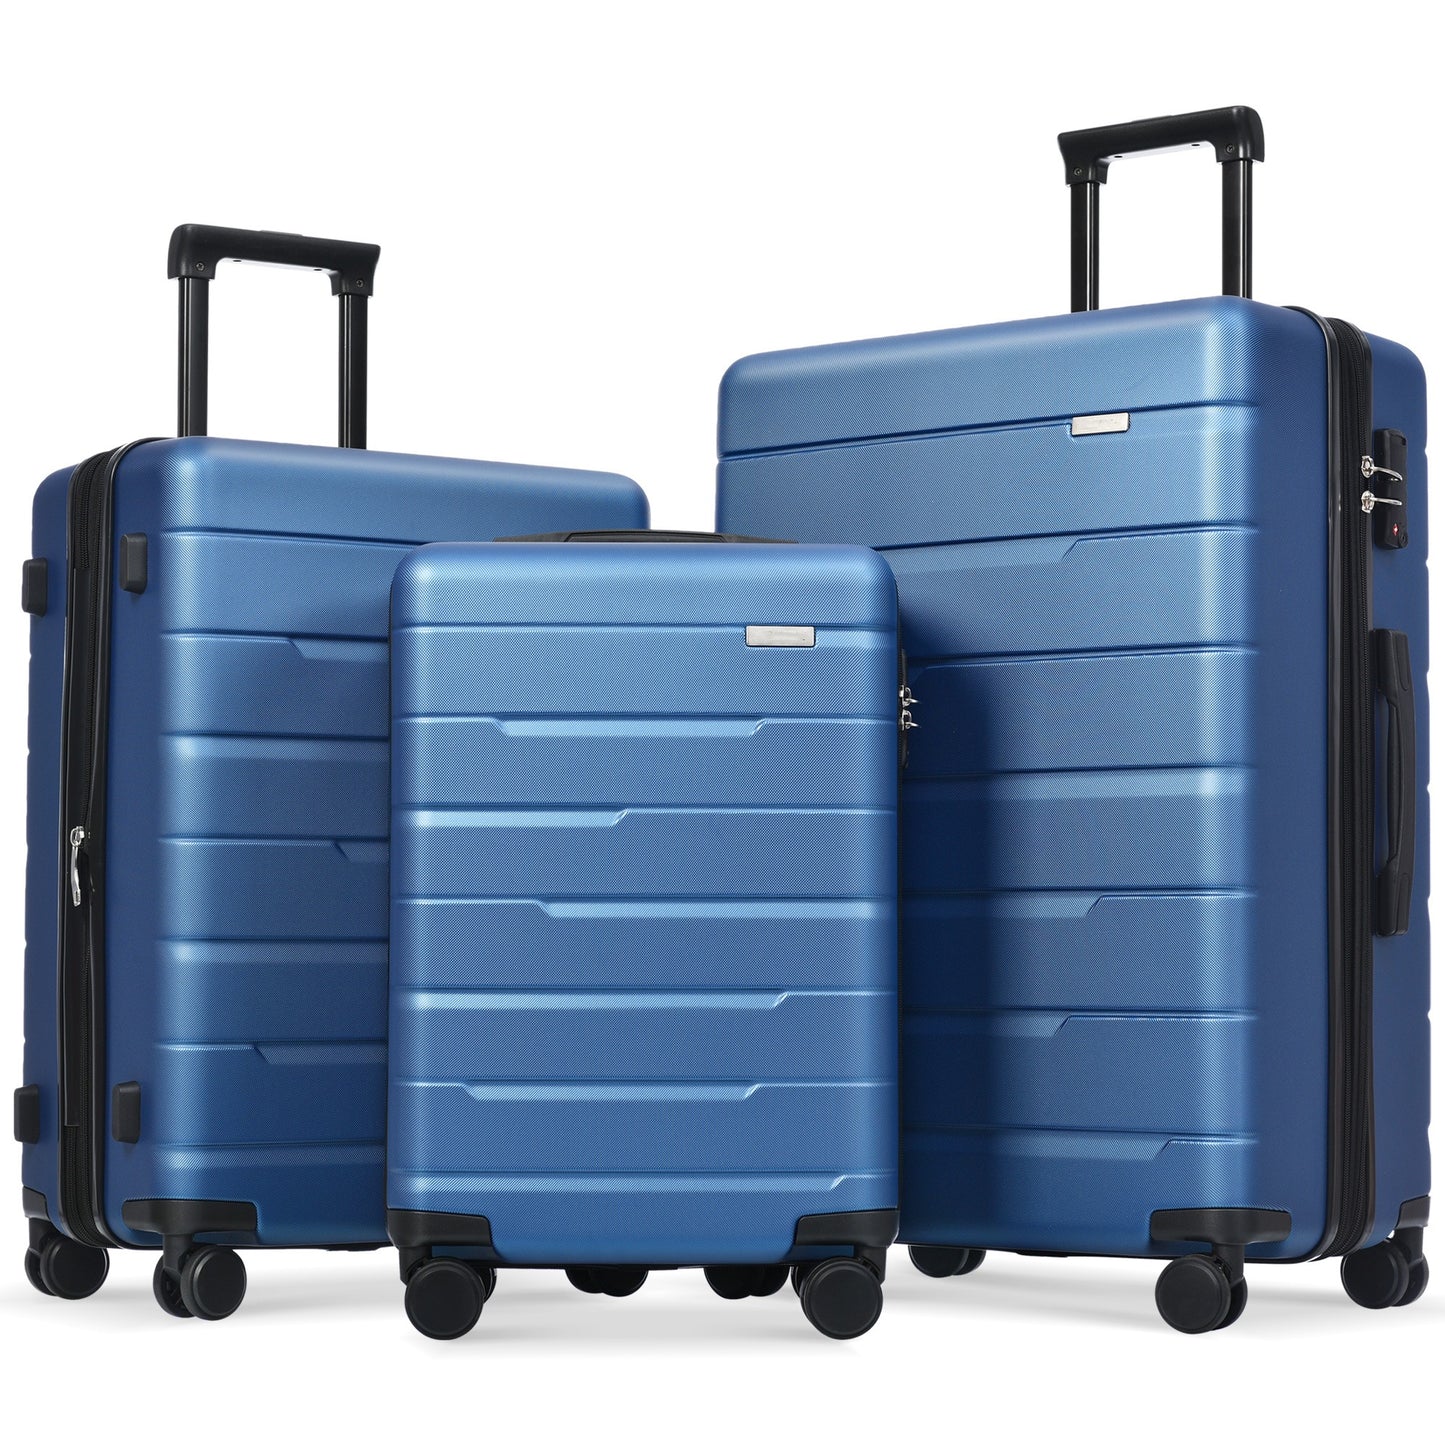 Luggage Sets 3 Piece Suitcase Set 20/24/28 Carry on Luggage Airline Approved Hard Case with Spinner Wheels Navy